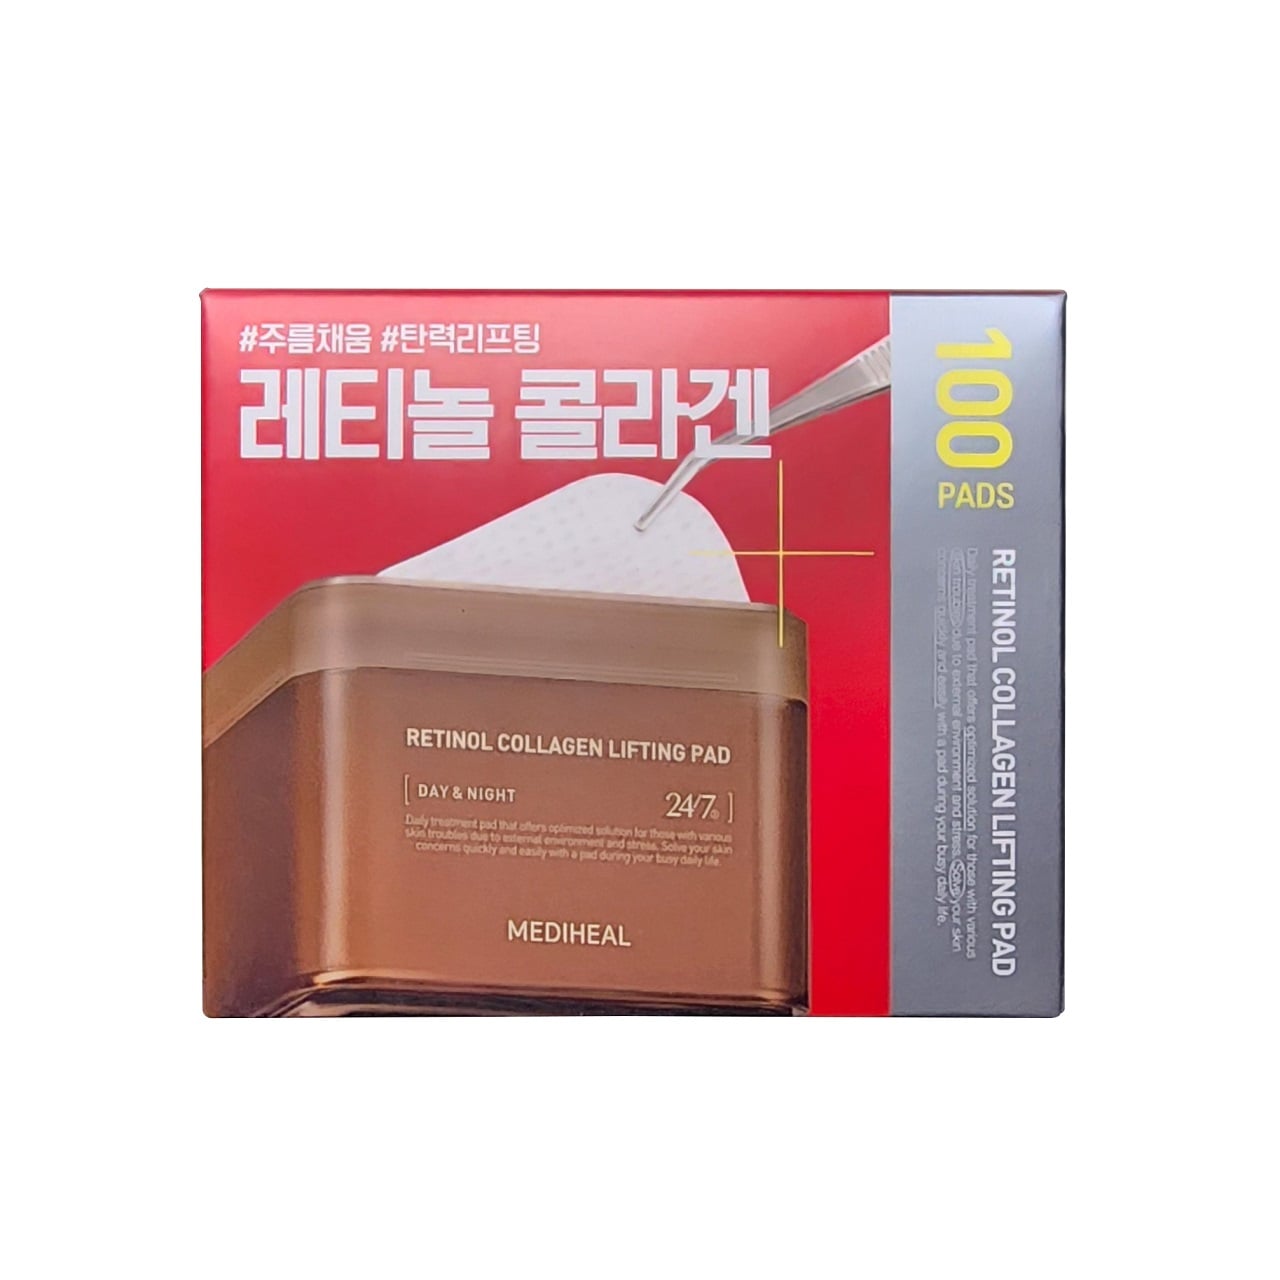 Product label for Mediheal Retinol Collagen Lifting Pads (100 count)